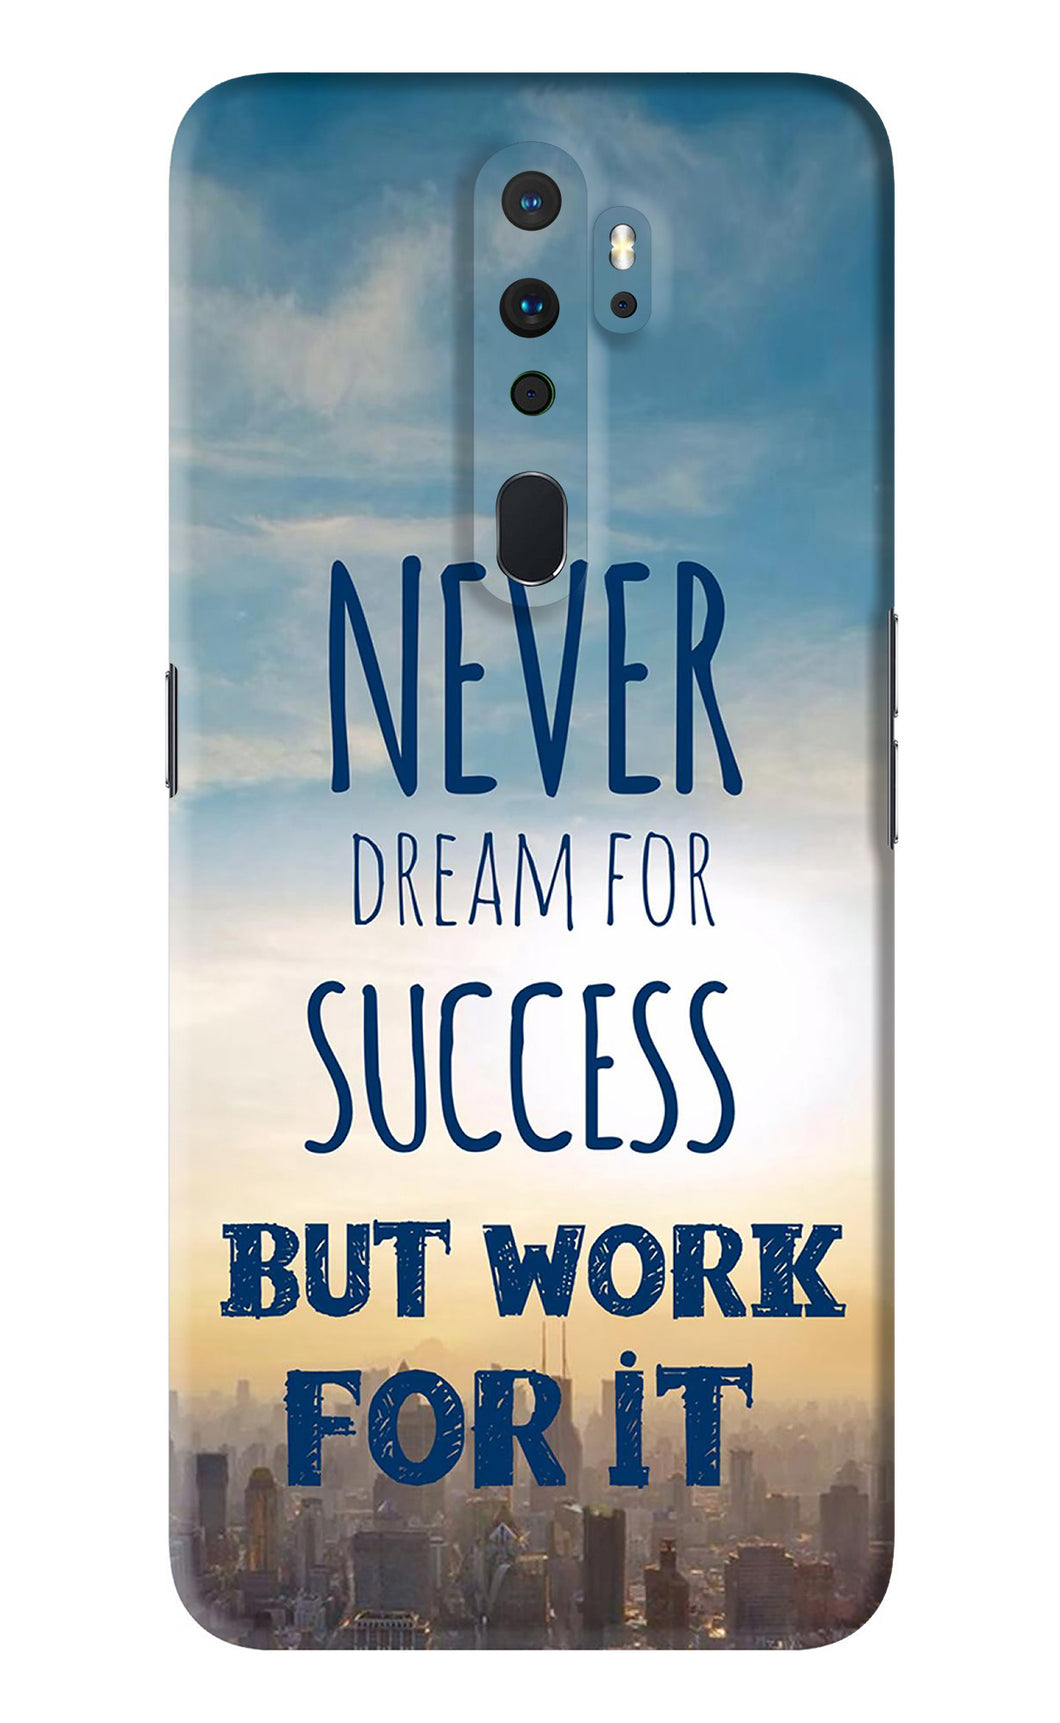 Never Dream For Success But Work For It Oppo A9 2020 Back Skin Wrap